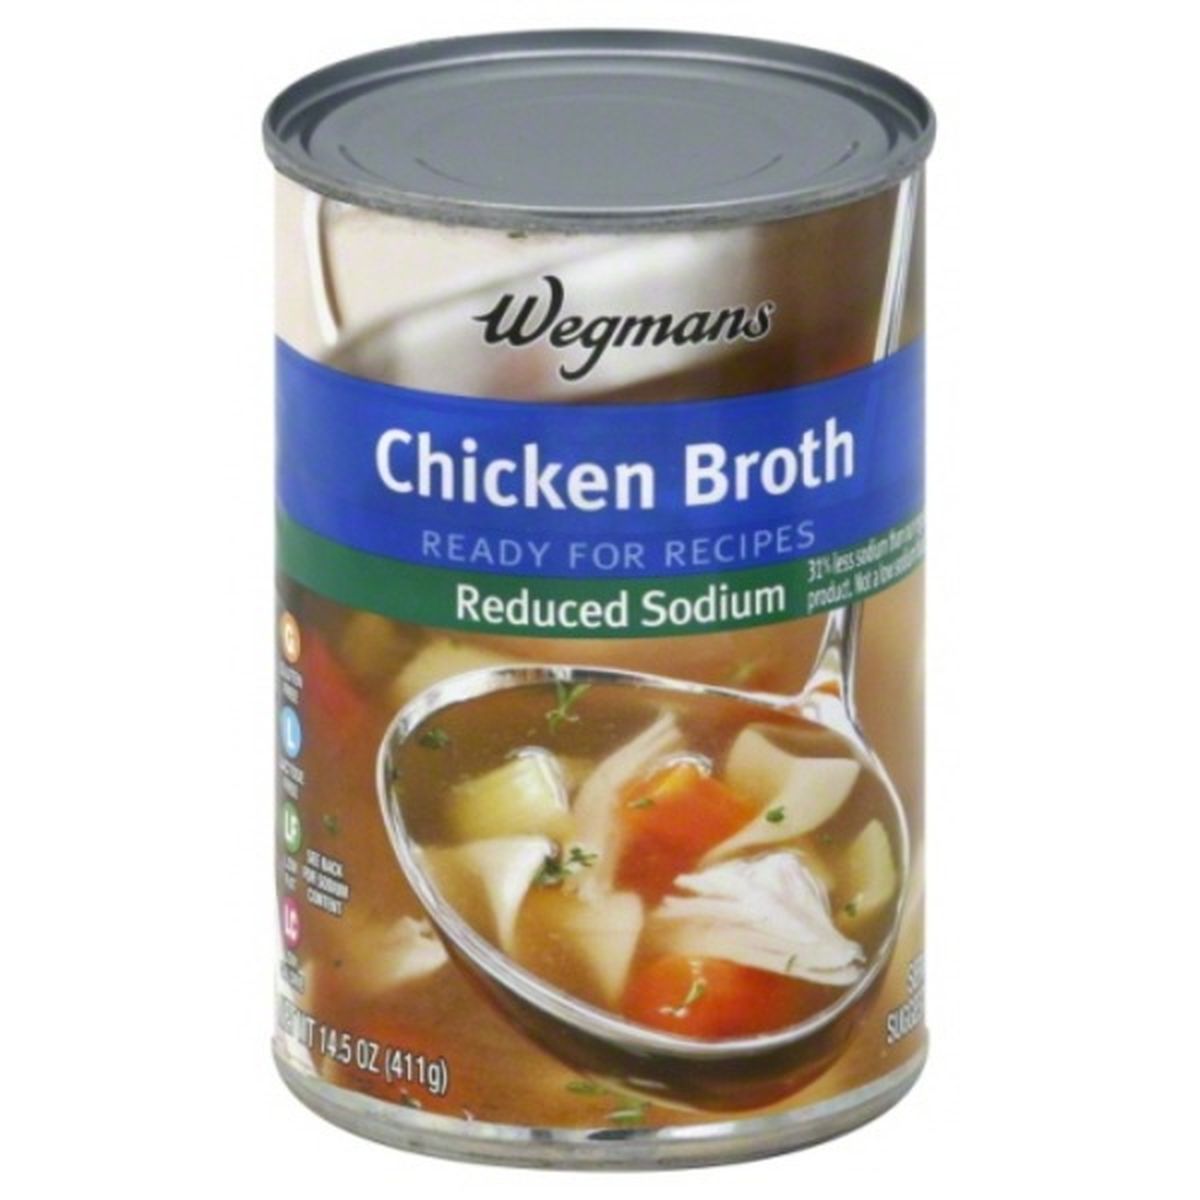 Calories in Wegmans Reduced Sodium Canned Chicken Broth